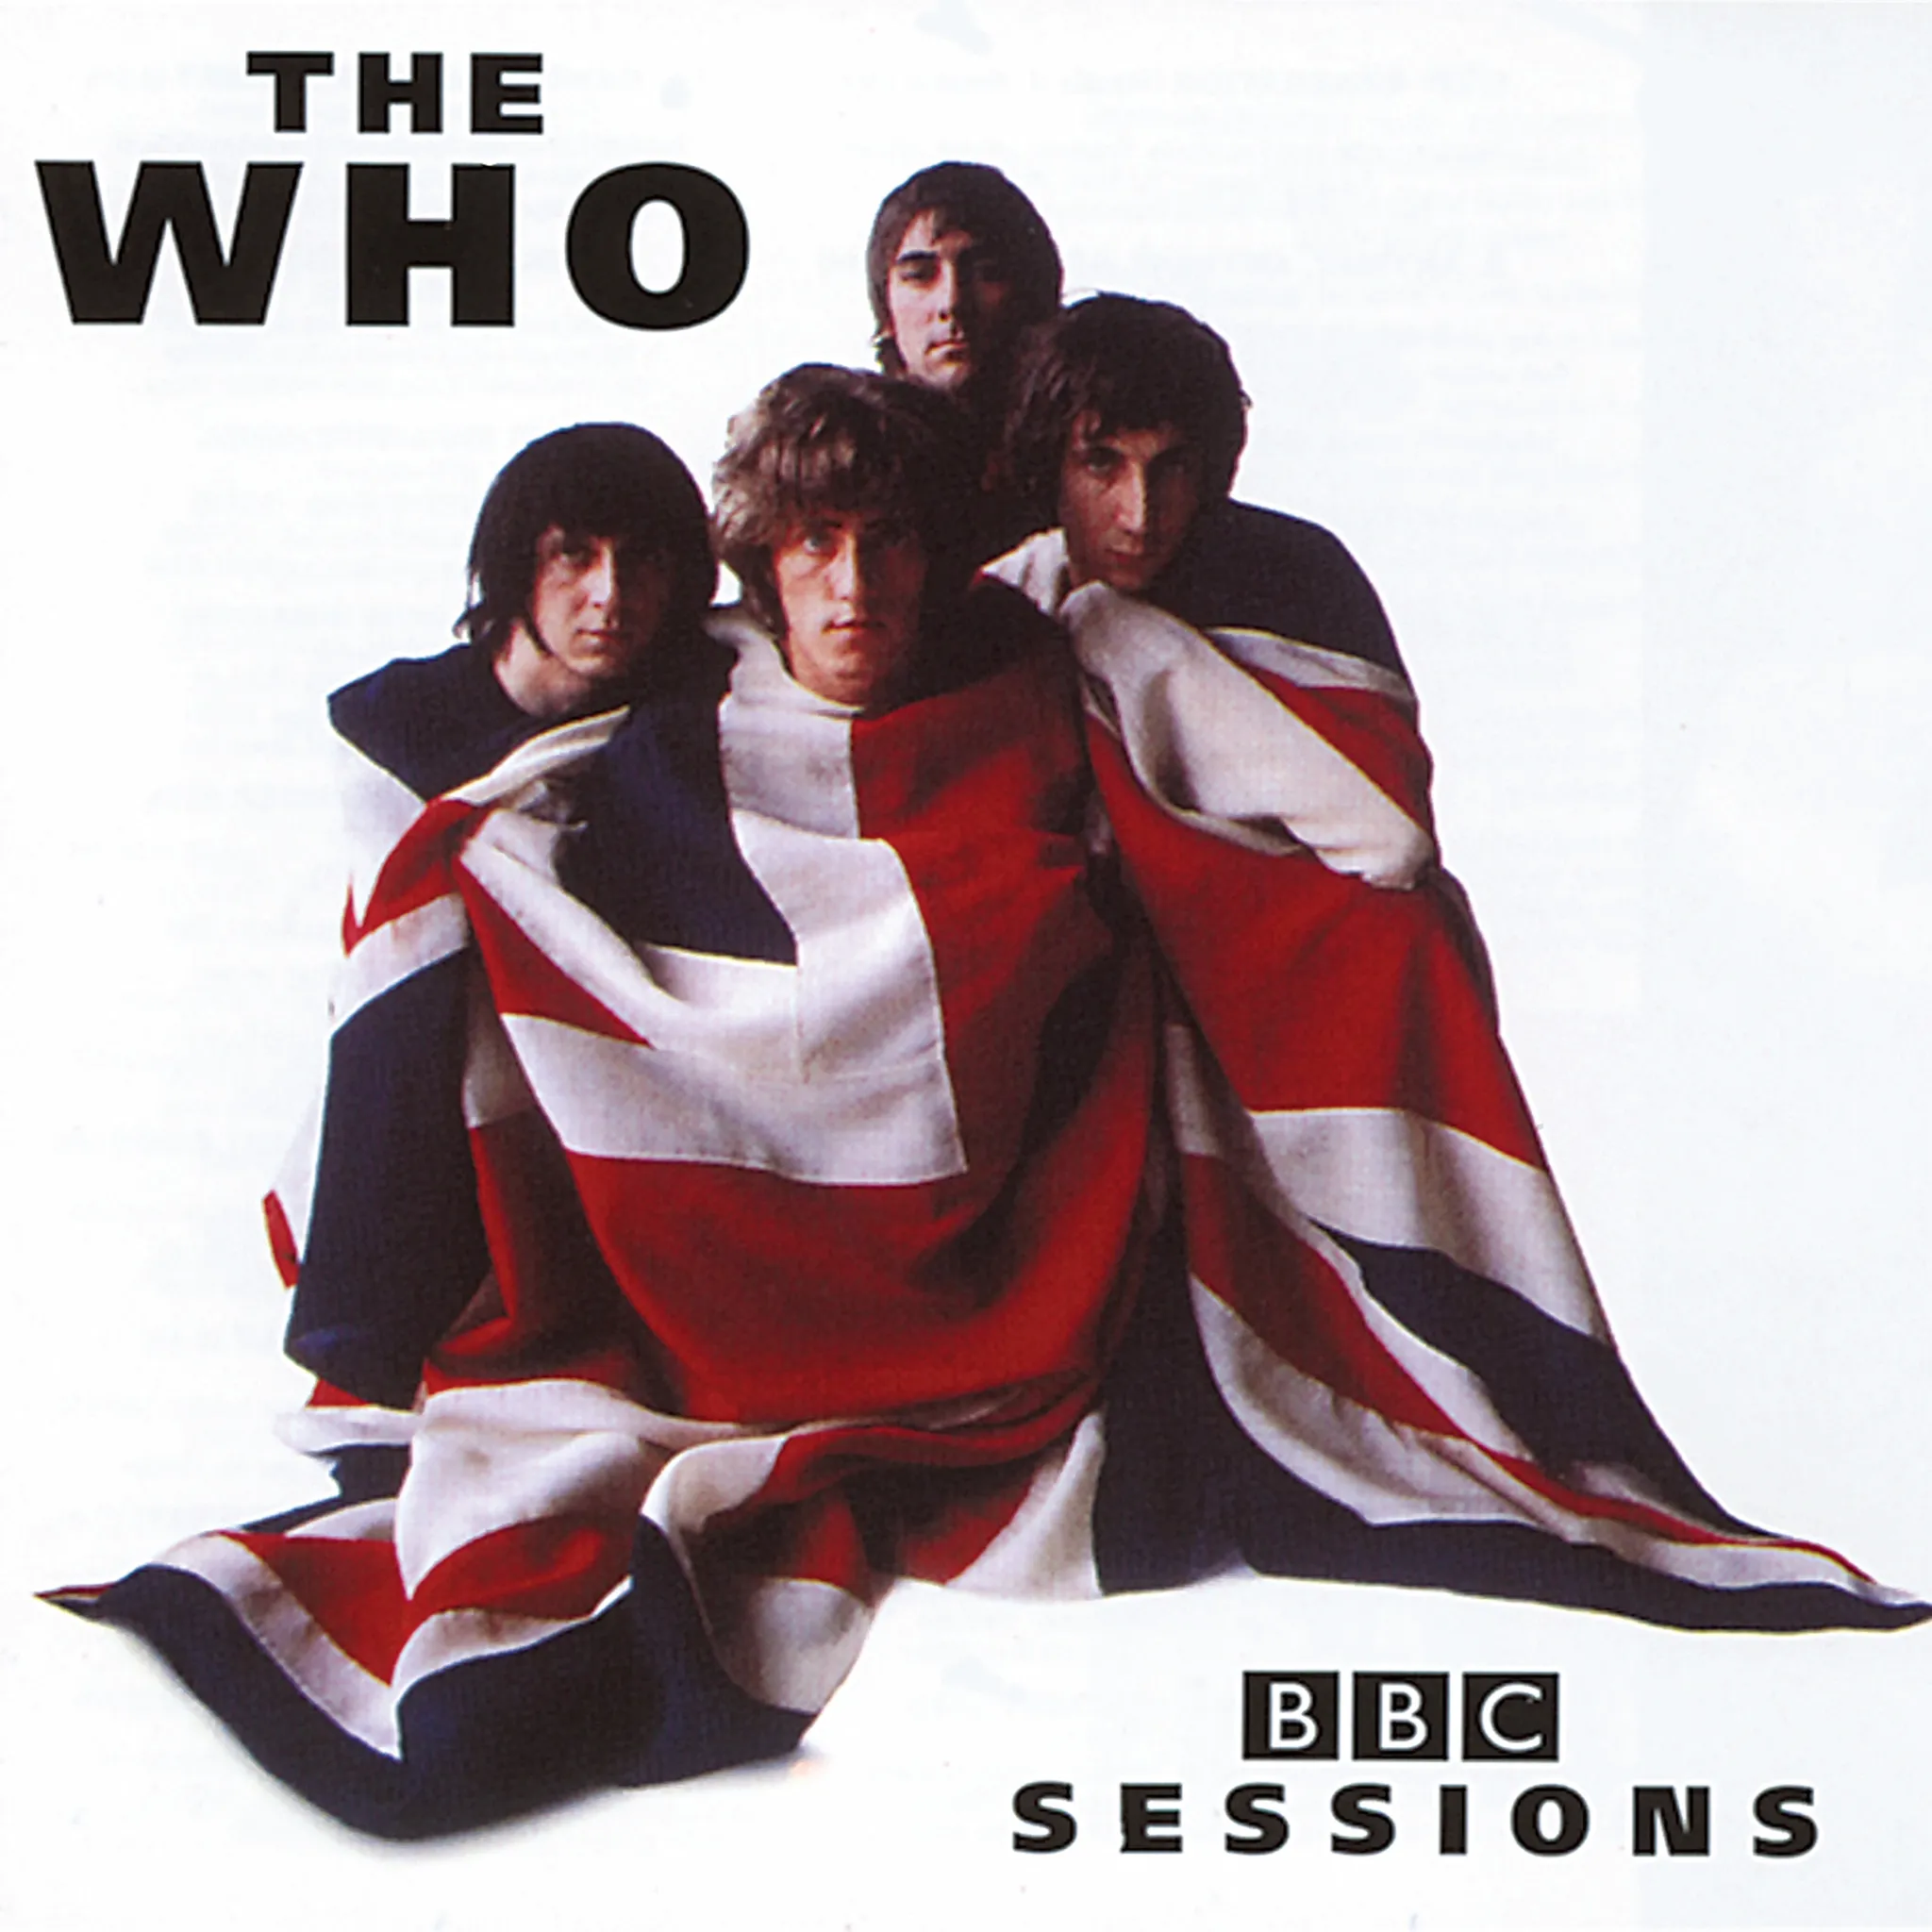 <strong>The Who - BBC Sessions</strong> (Vinyl LP - black)